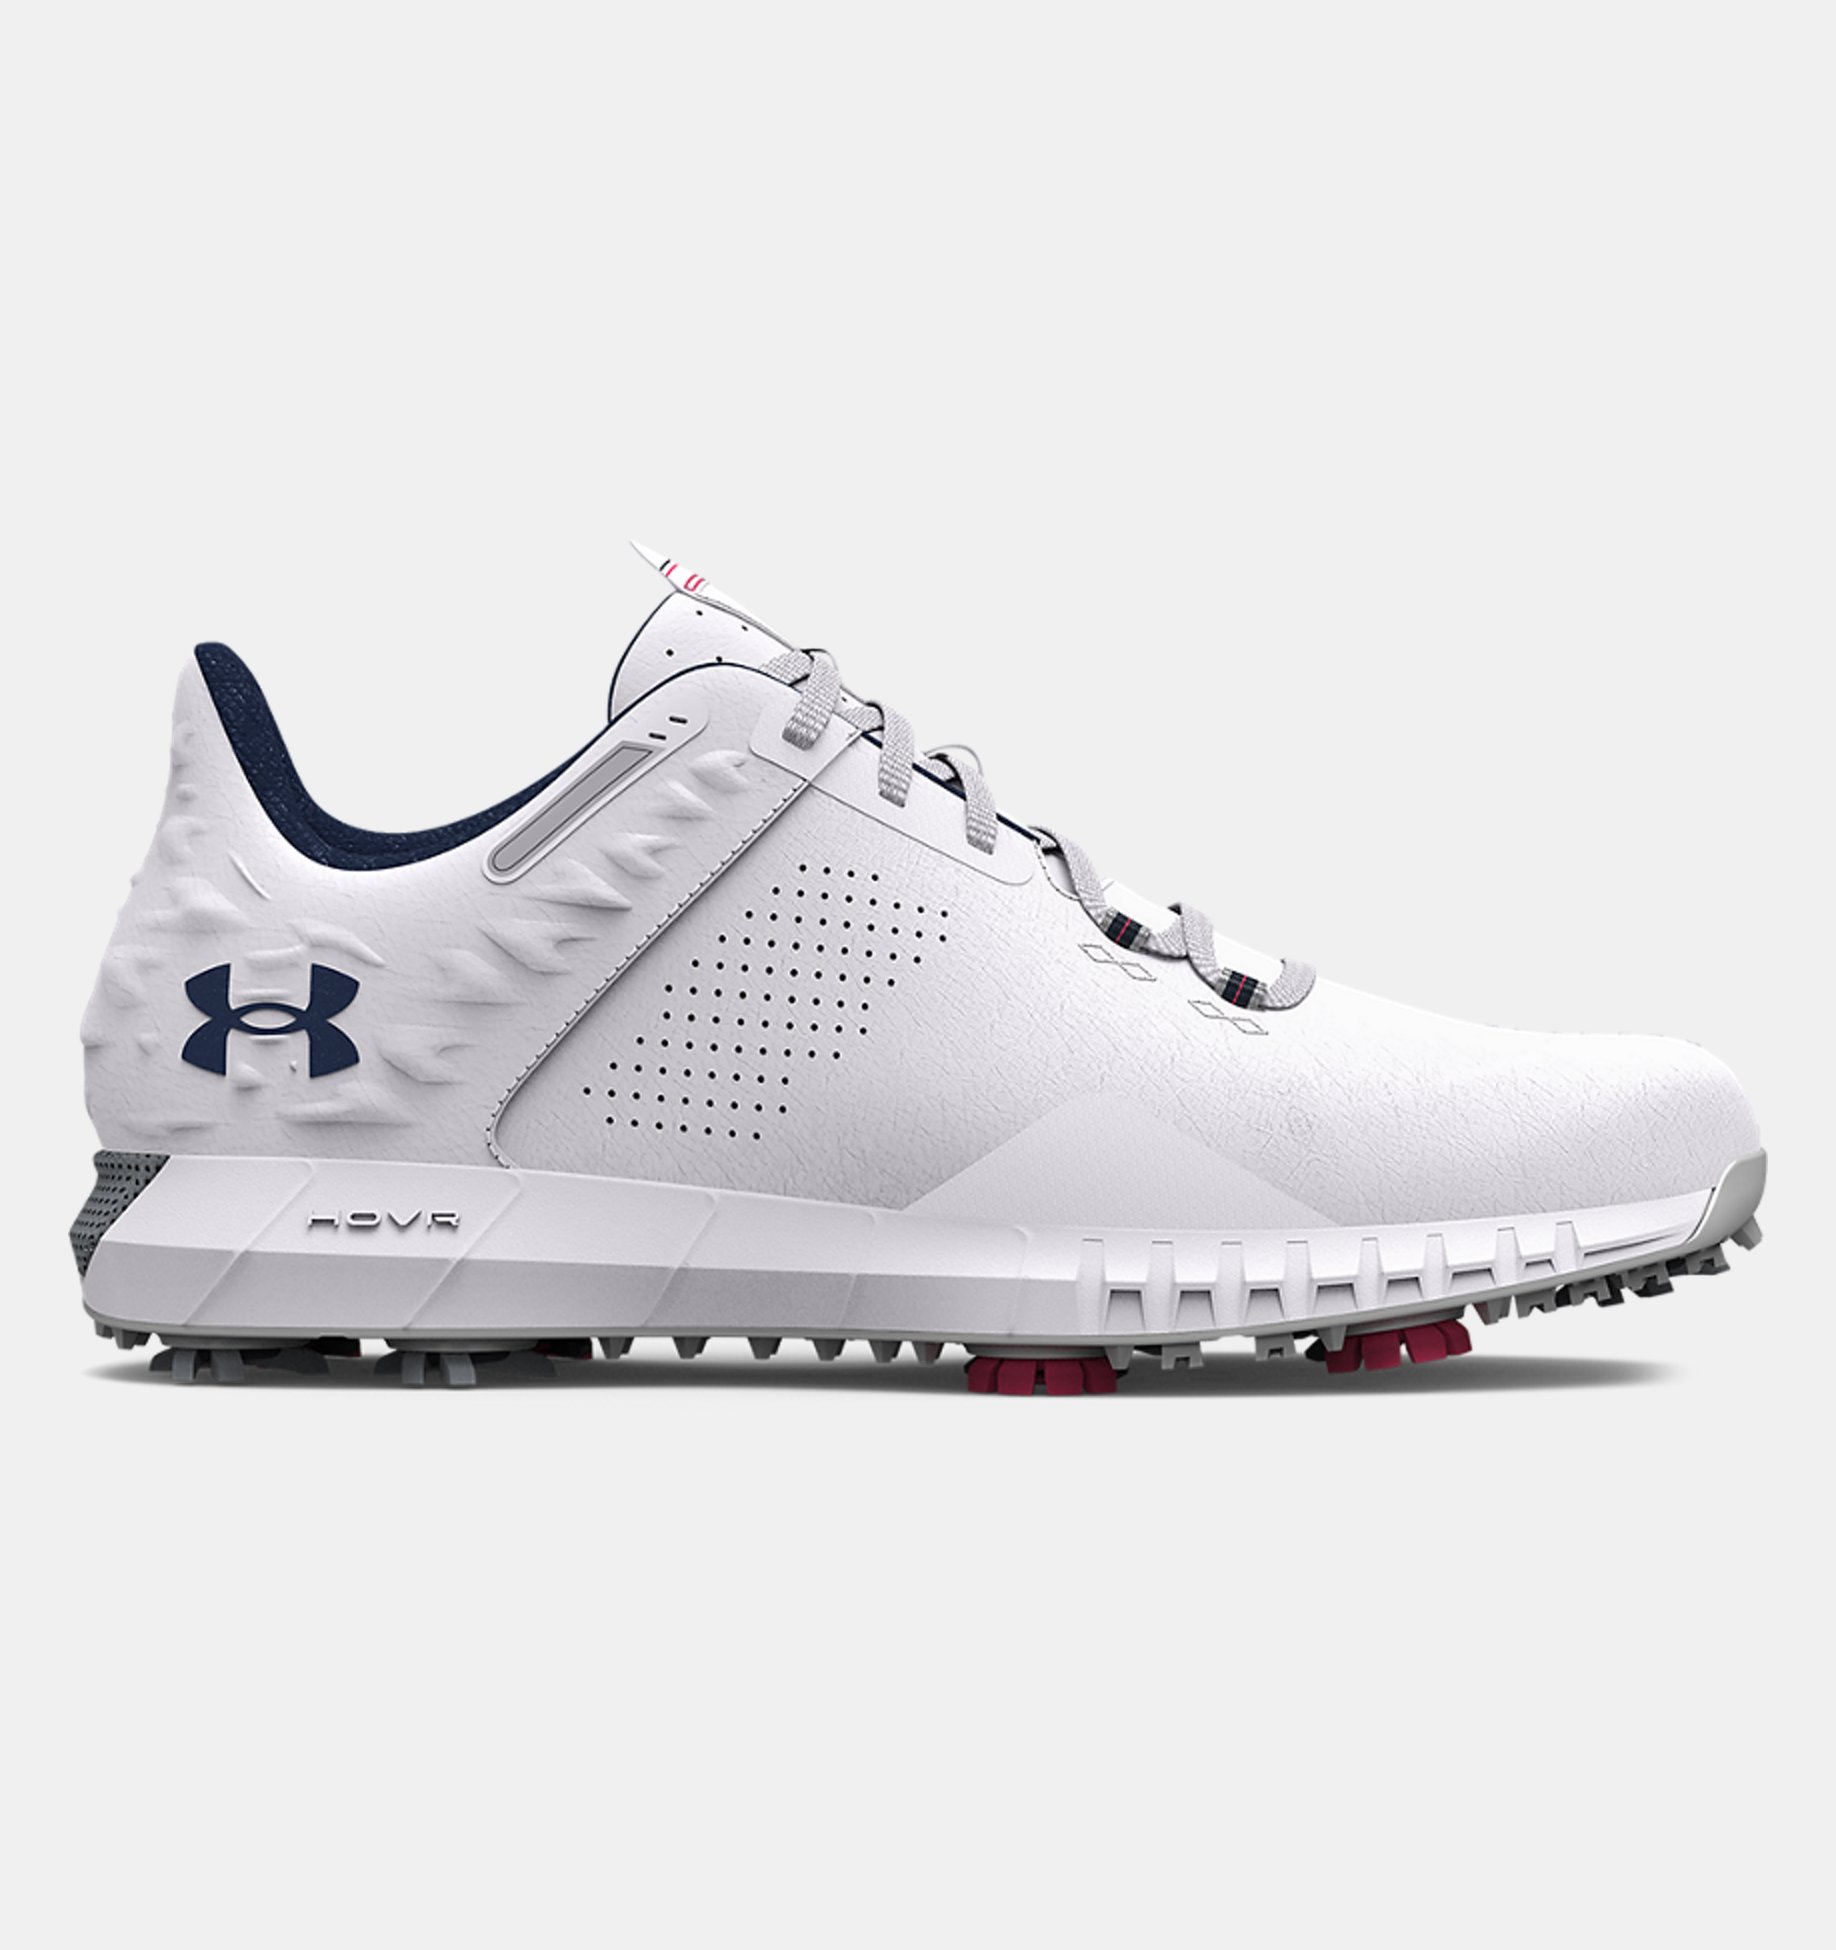 Are Under Armour Golf Shoes Good? - Shoe Effect